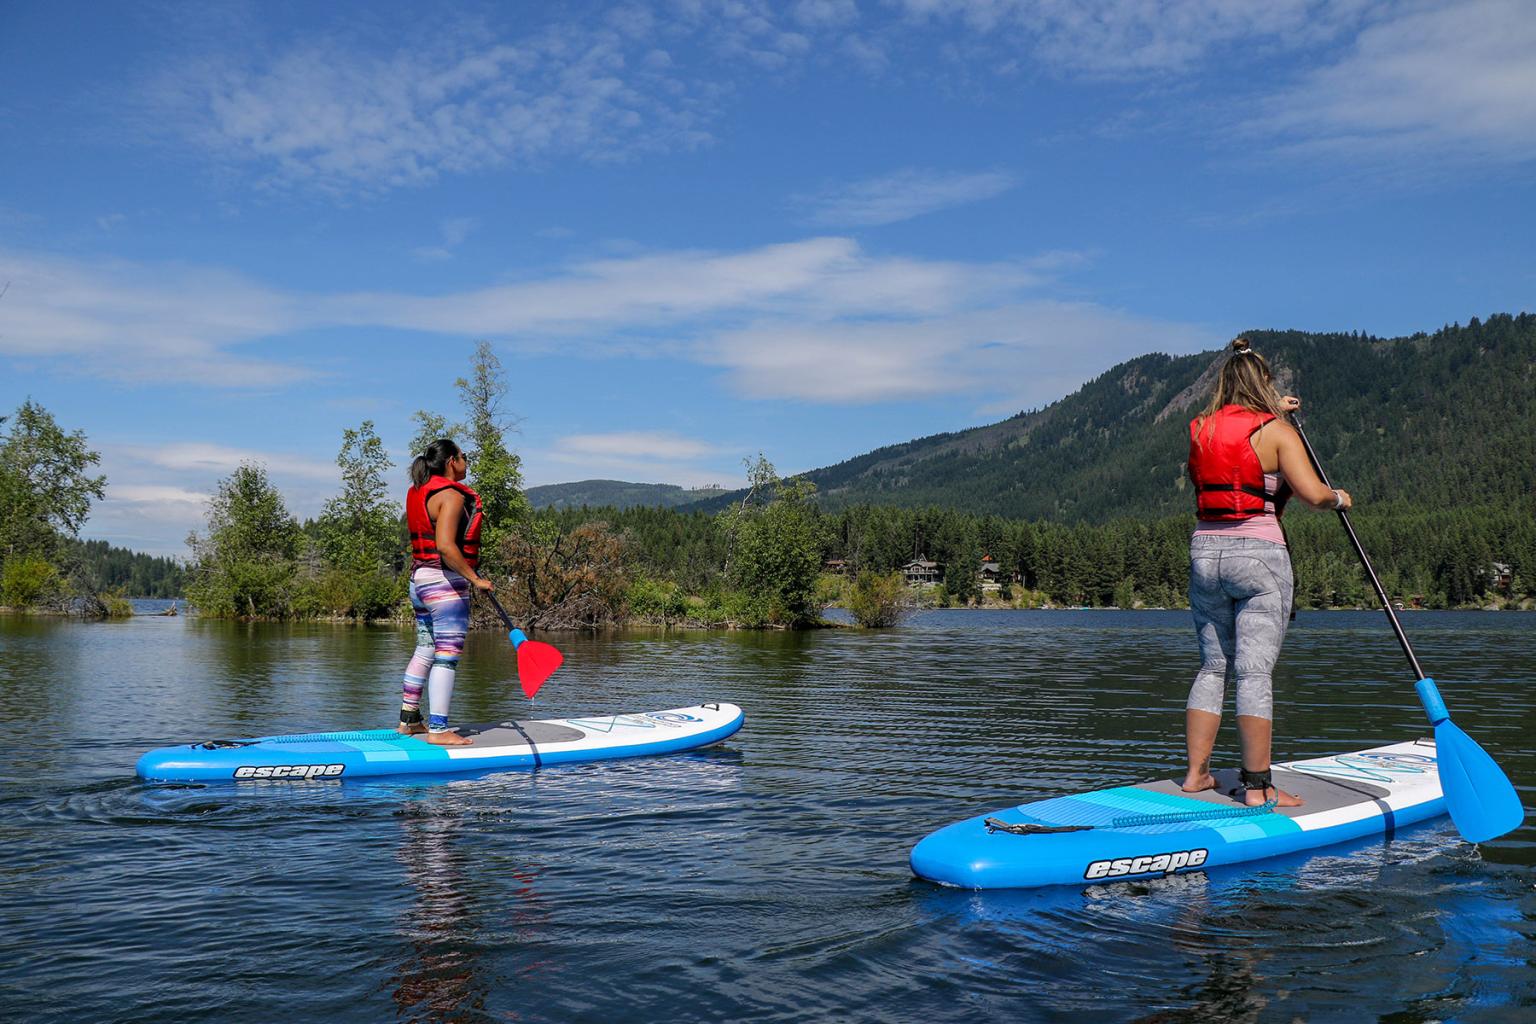 Stand up paddle boarding on Heffley Lake